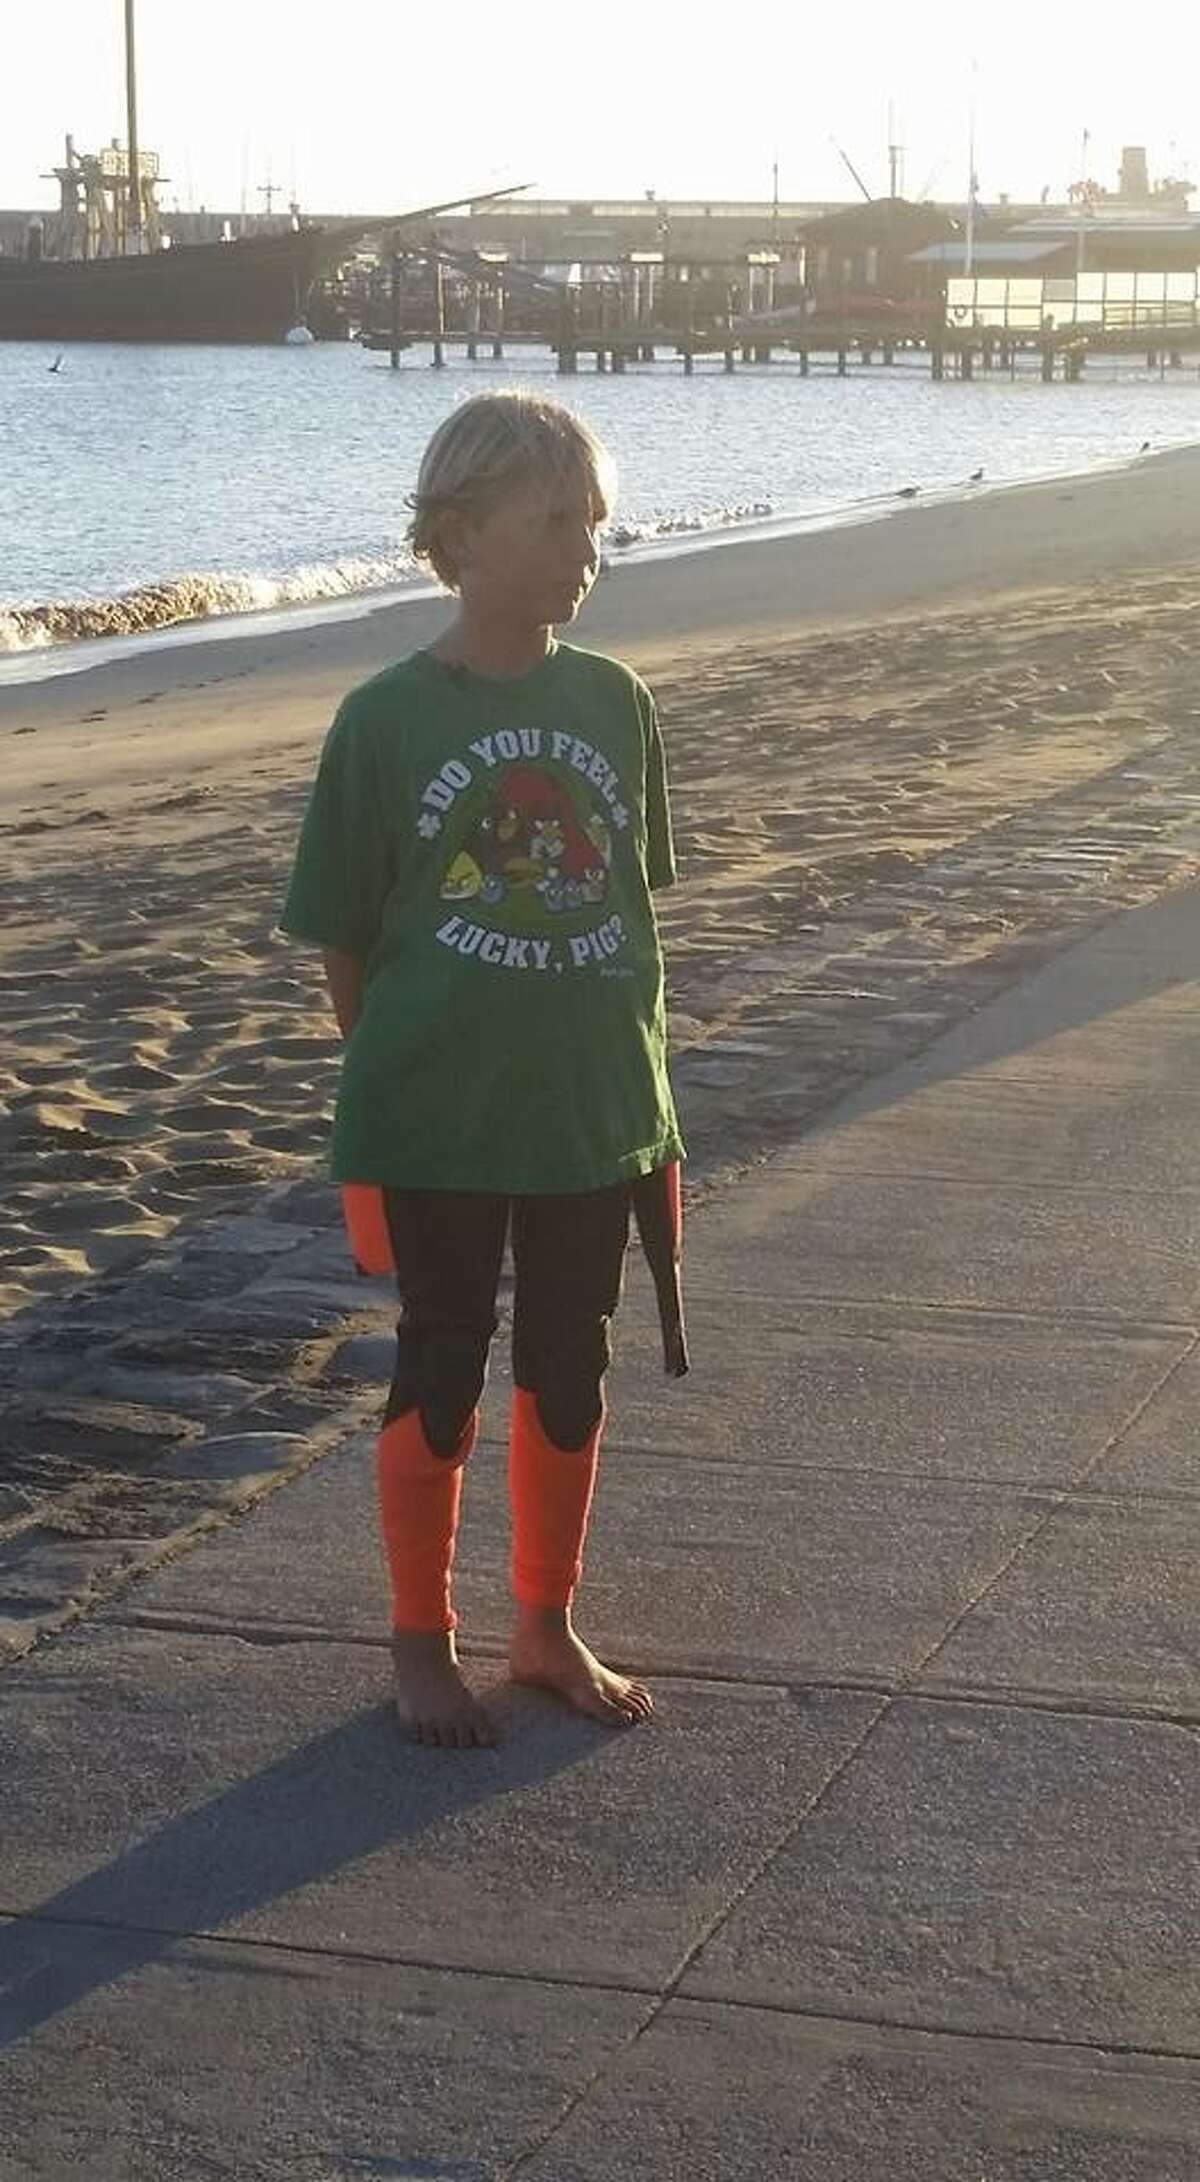 James Savage, 9, of Los Banos, Calif., became the youngest person to ever swim from the San Francisco shore to Alcatraz and back on June 14, 2016.